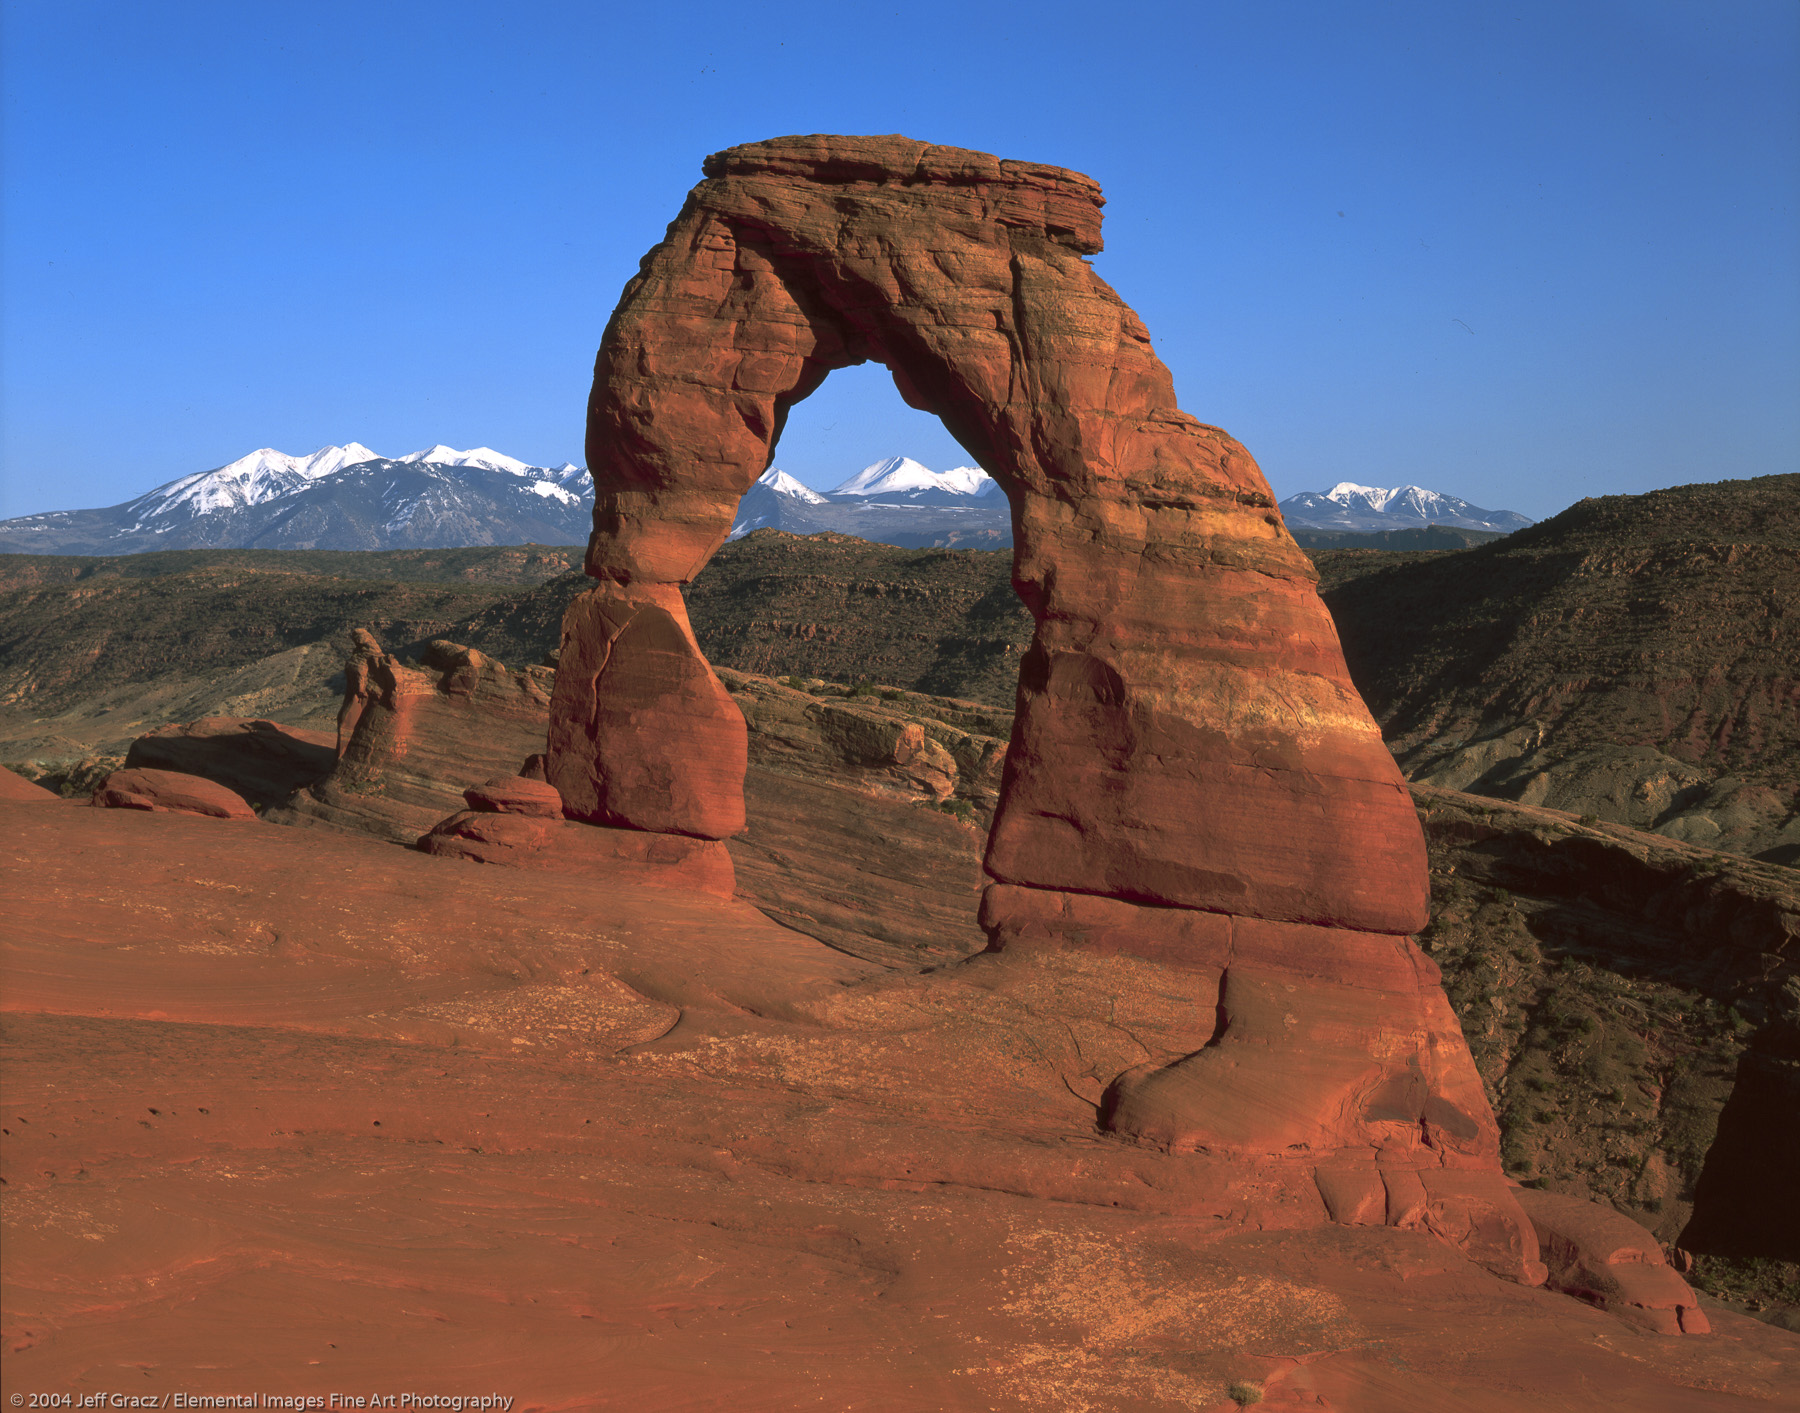 Delicate Arch with distant La Sal Mtns | Arches National Park | UT | USA - © © 2004 Jeff Gracz / Elemental Images Fine Art Photography - All Rights Reserved Worldwide